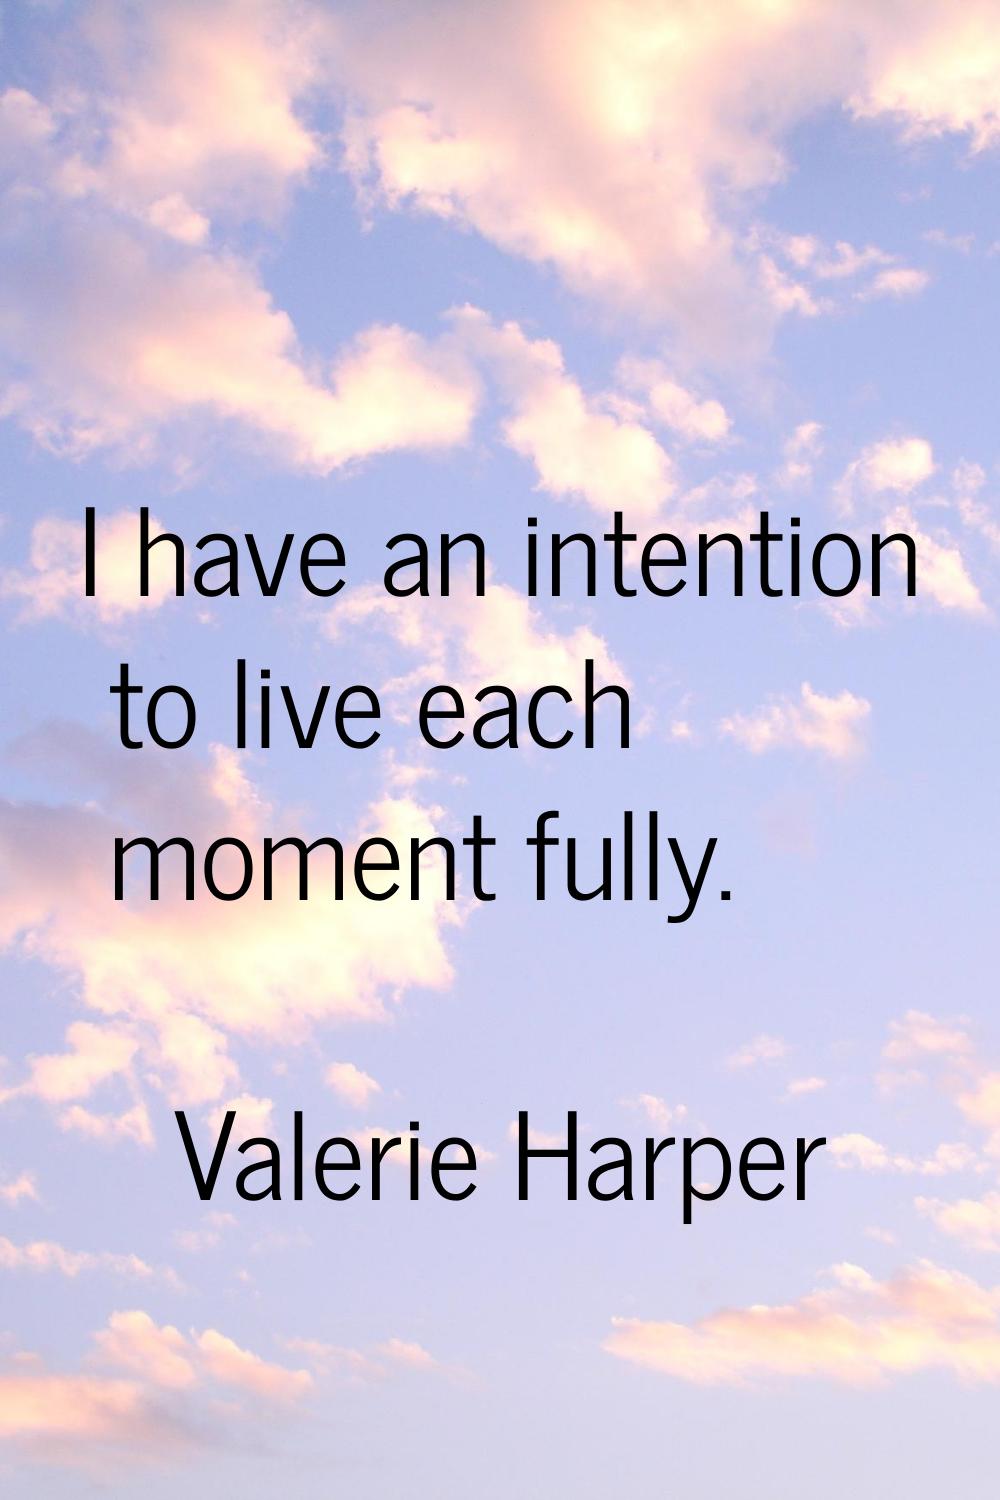 I have an intention to live each moment fully.